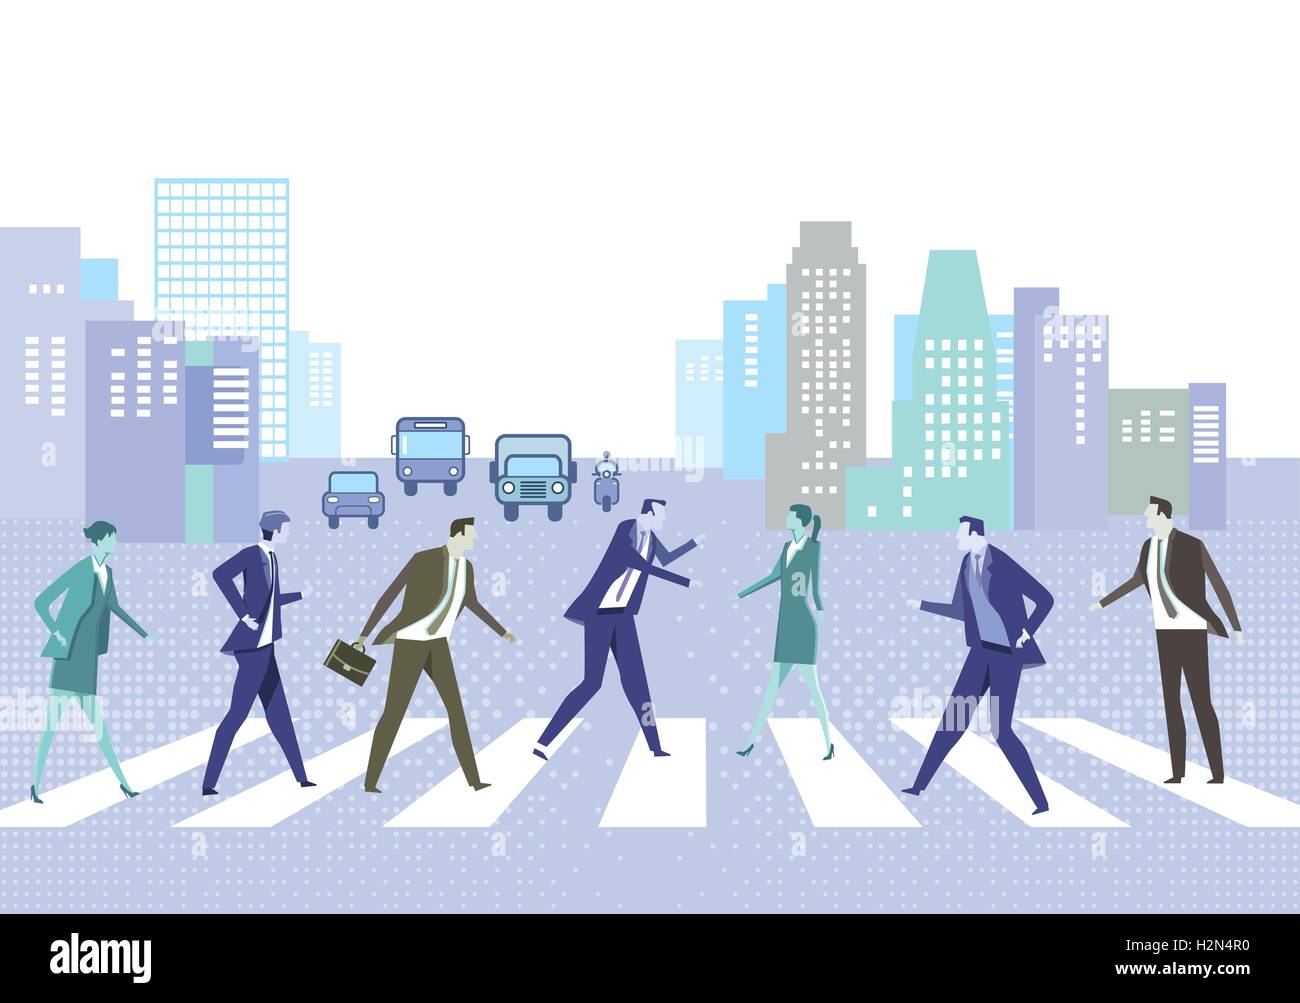 Street with crosswalks and people Stock Vector